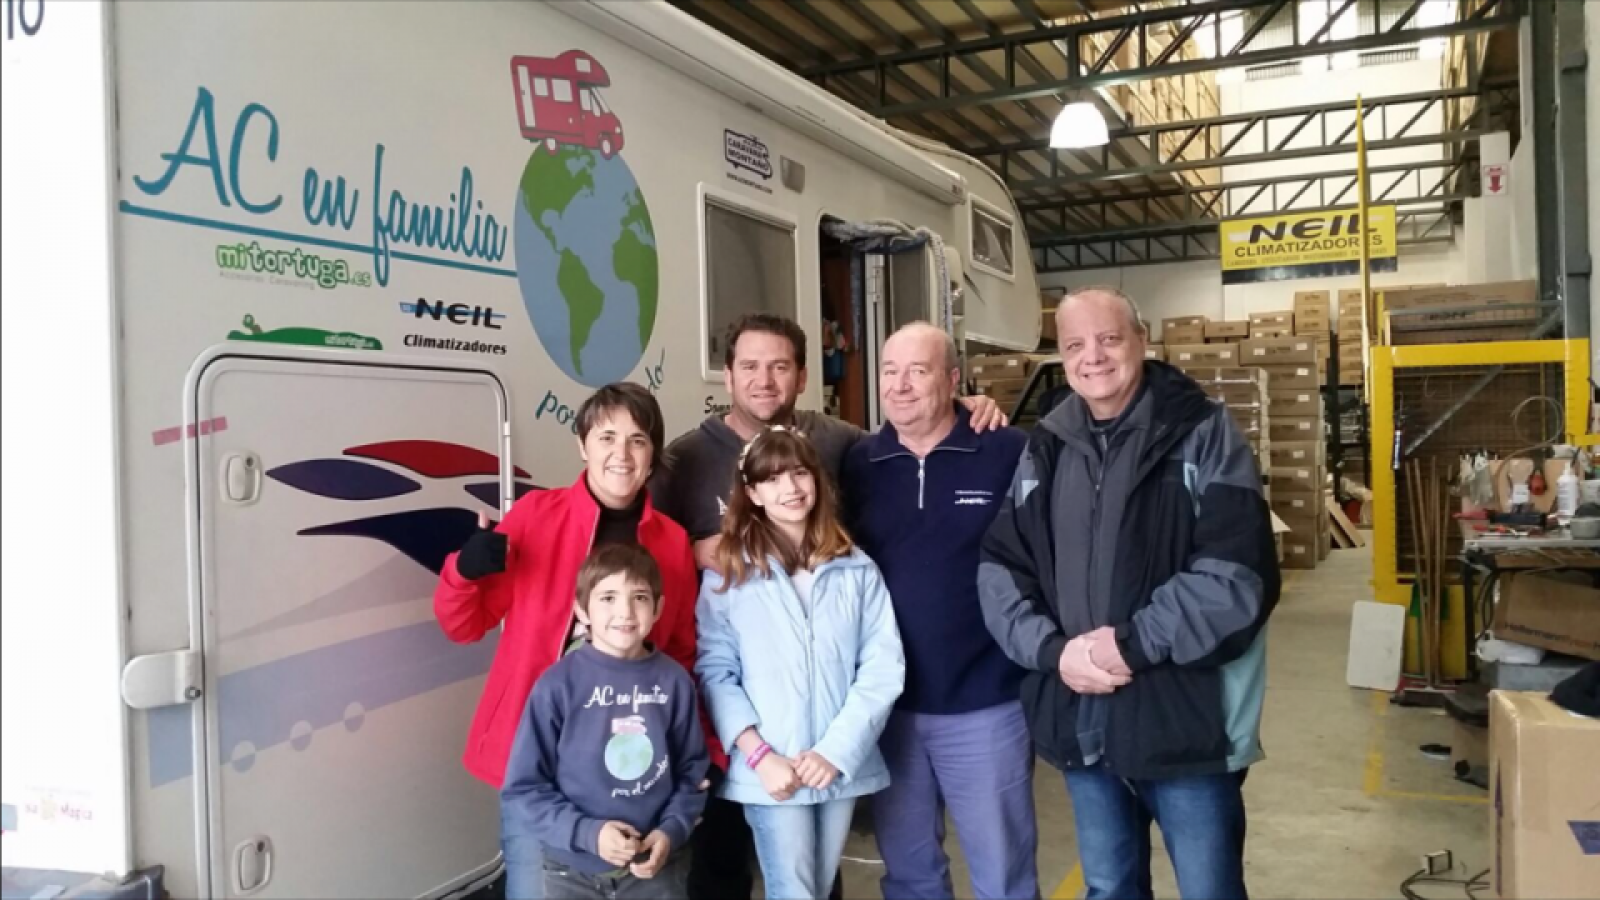 SPONSORSHIP OF MITORTUGA.ES AND AIR CONDITIONERS NEIL MOTORHOME IN FAMILY